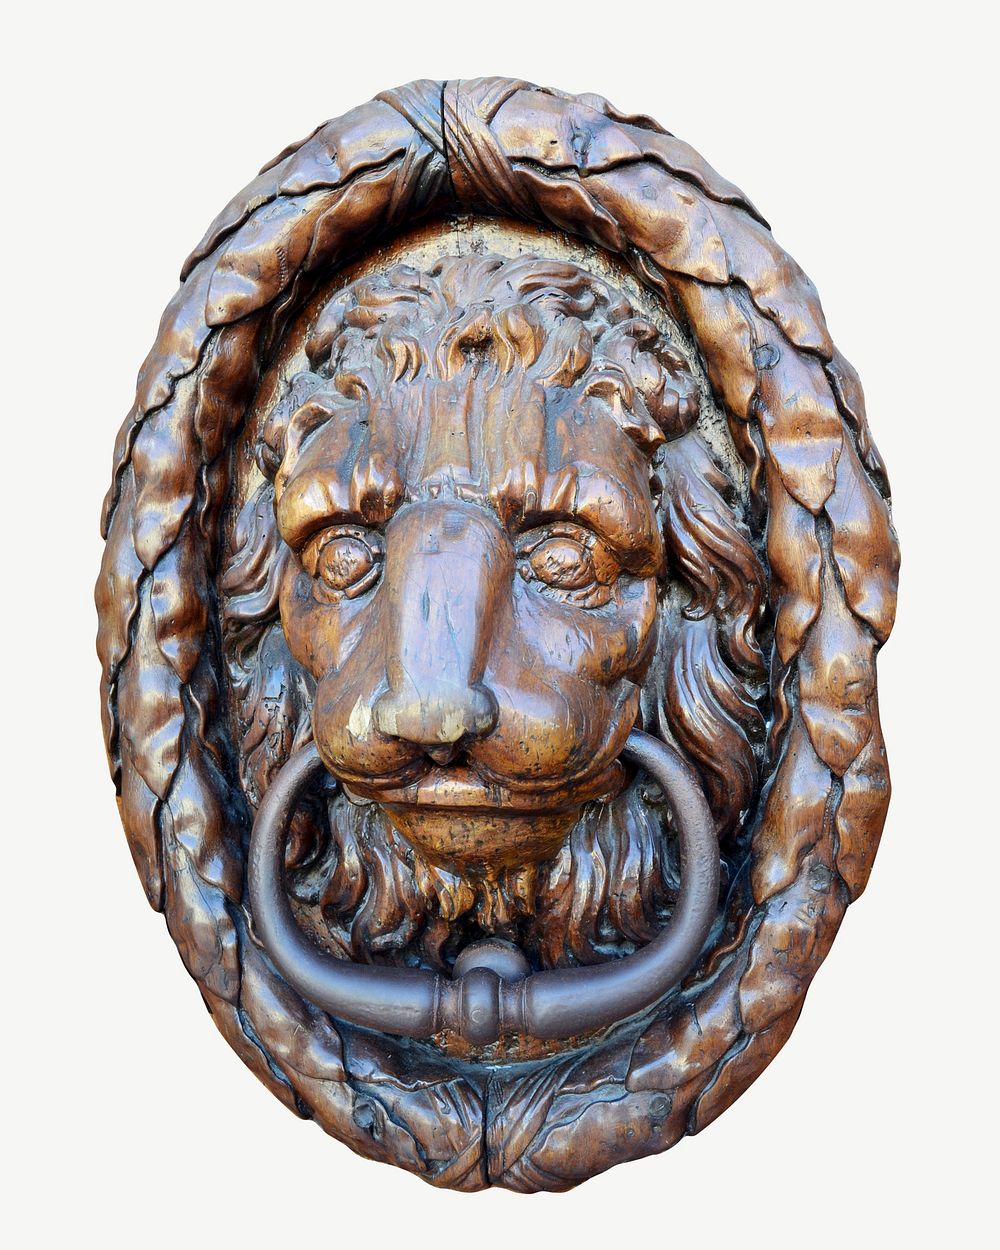 Lion door knocker collage element isolated image